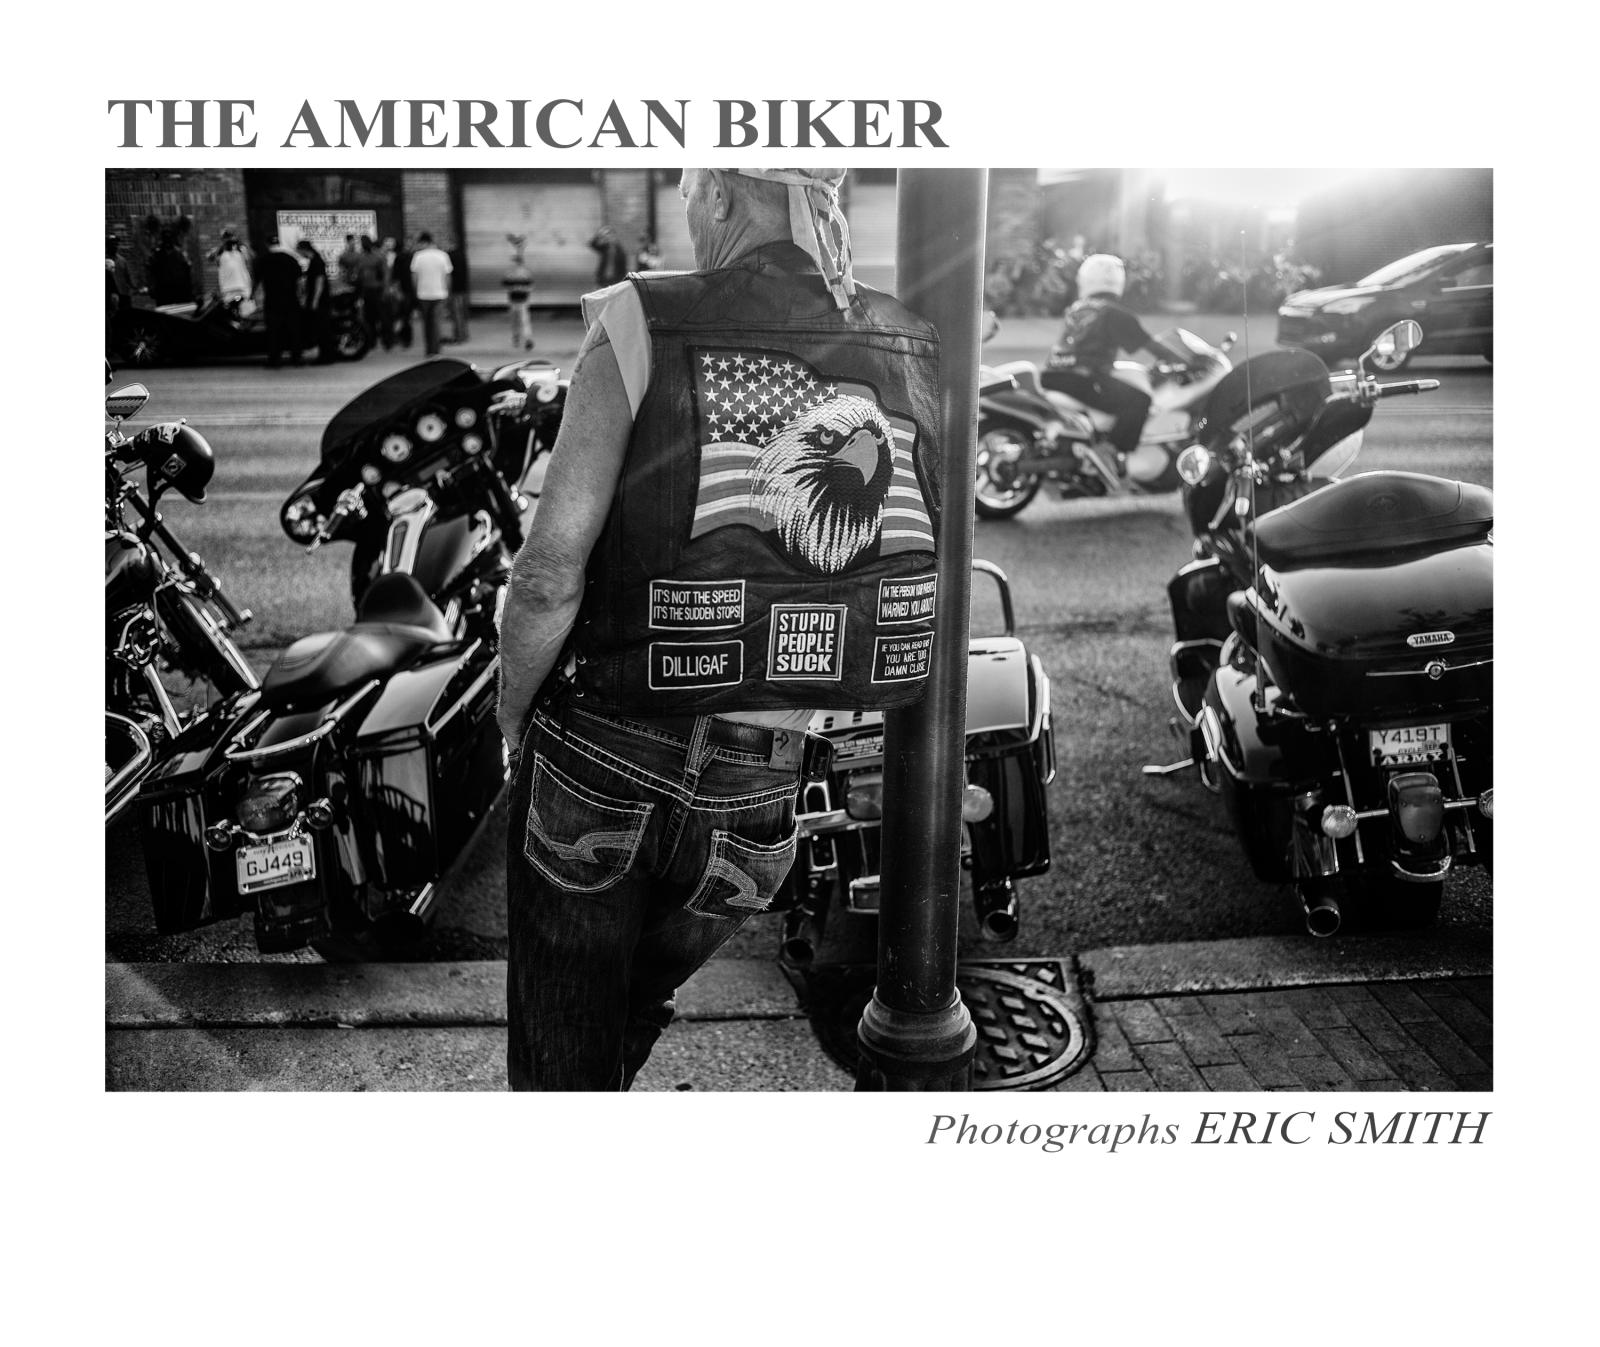 Thumbnail of  The American Biker , A book of _e pictures of the Biker culture.